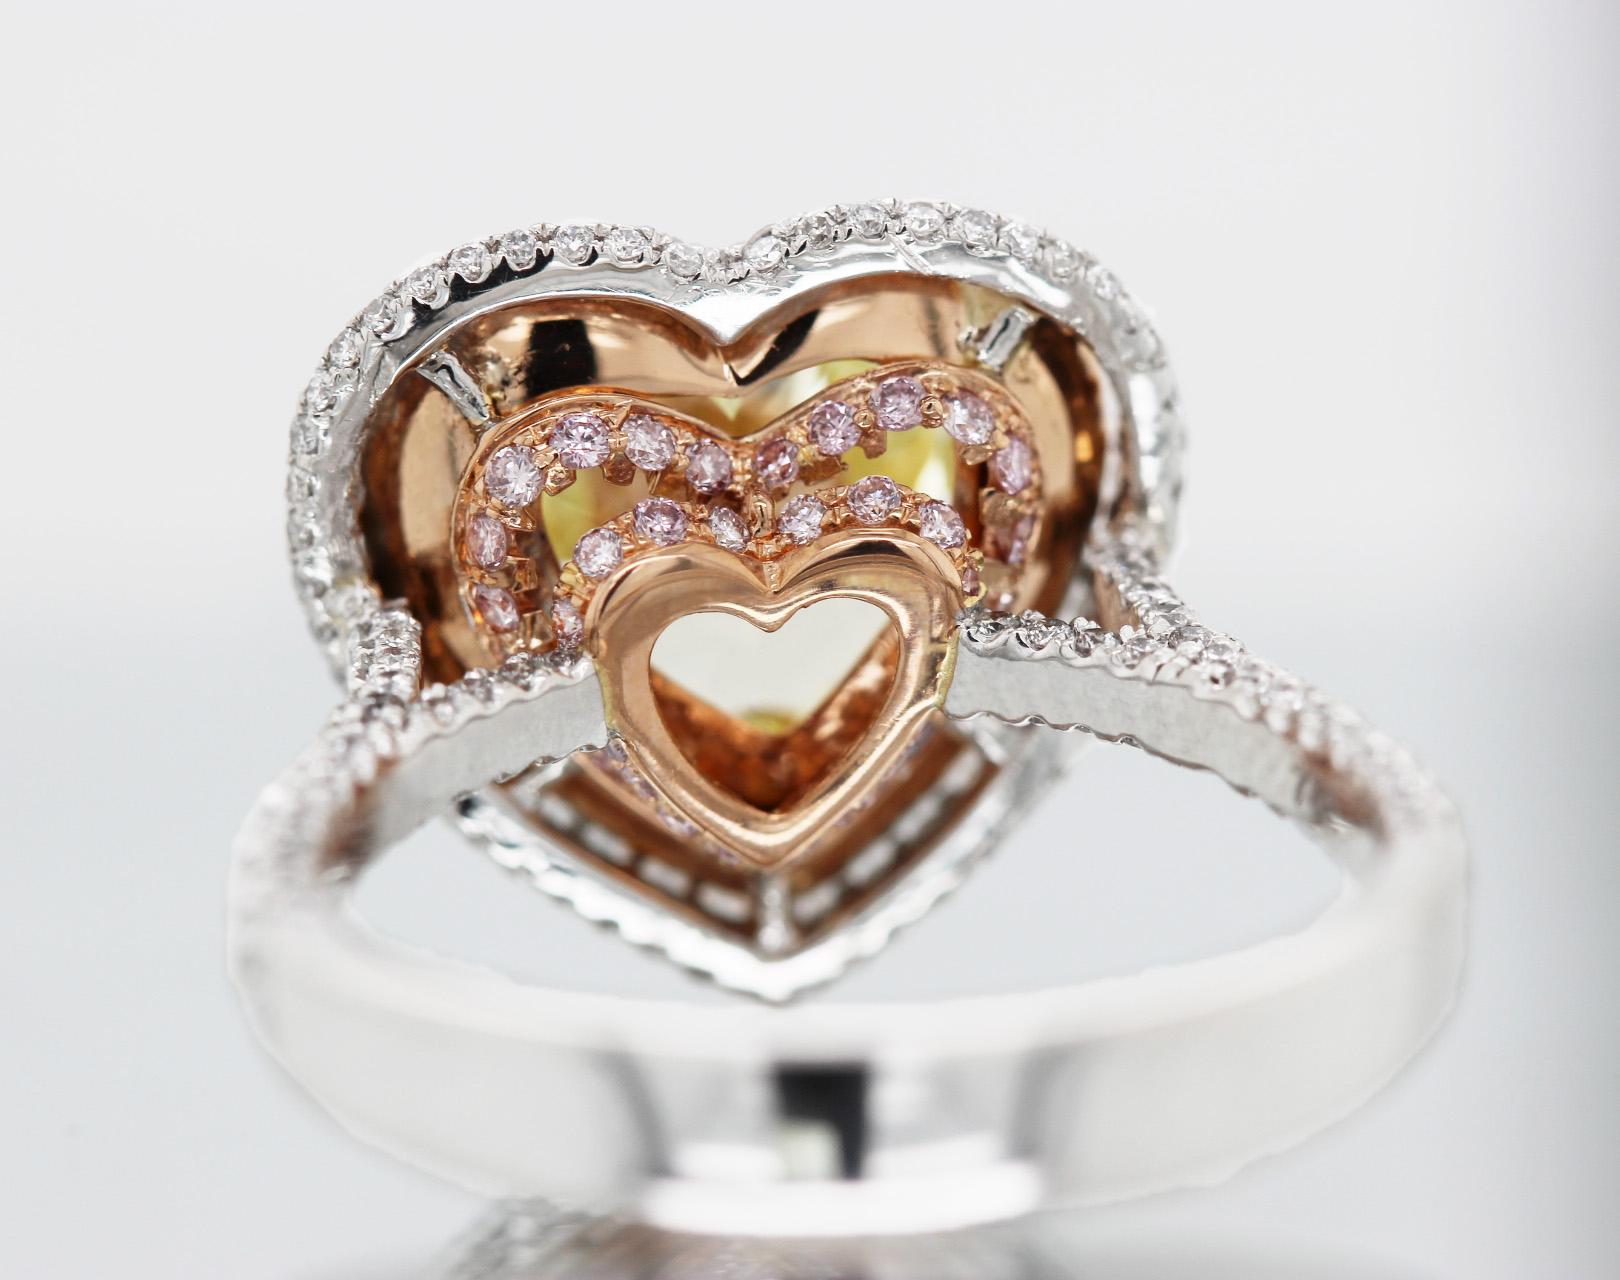 Natural Fancy Yellow heart-shaped 5.05 carat diamond engagement ring with GIA-certified diamonds on 18k rose gold and platinum setting. GIA-certified fancy yellow VS1 diamond engagement ring with a heart-cut 5.05 ct center stone and halo setting